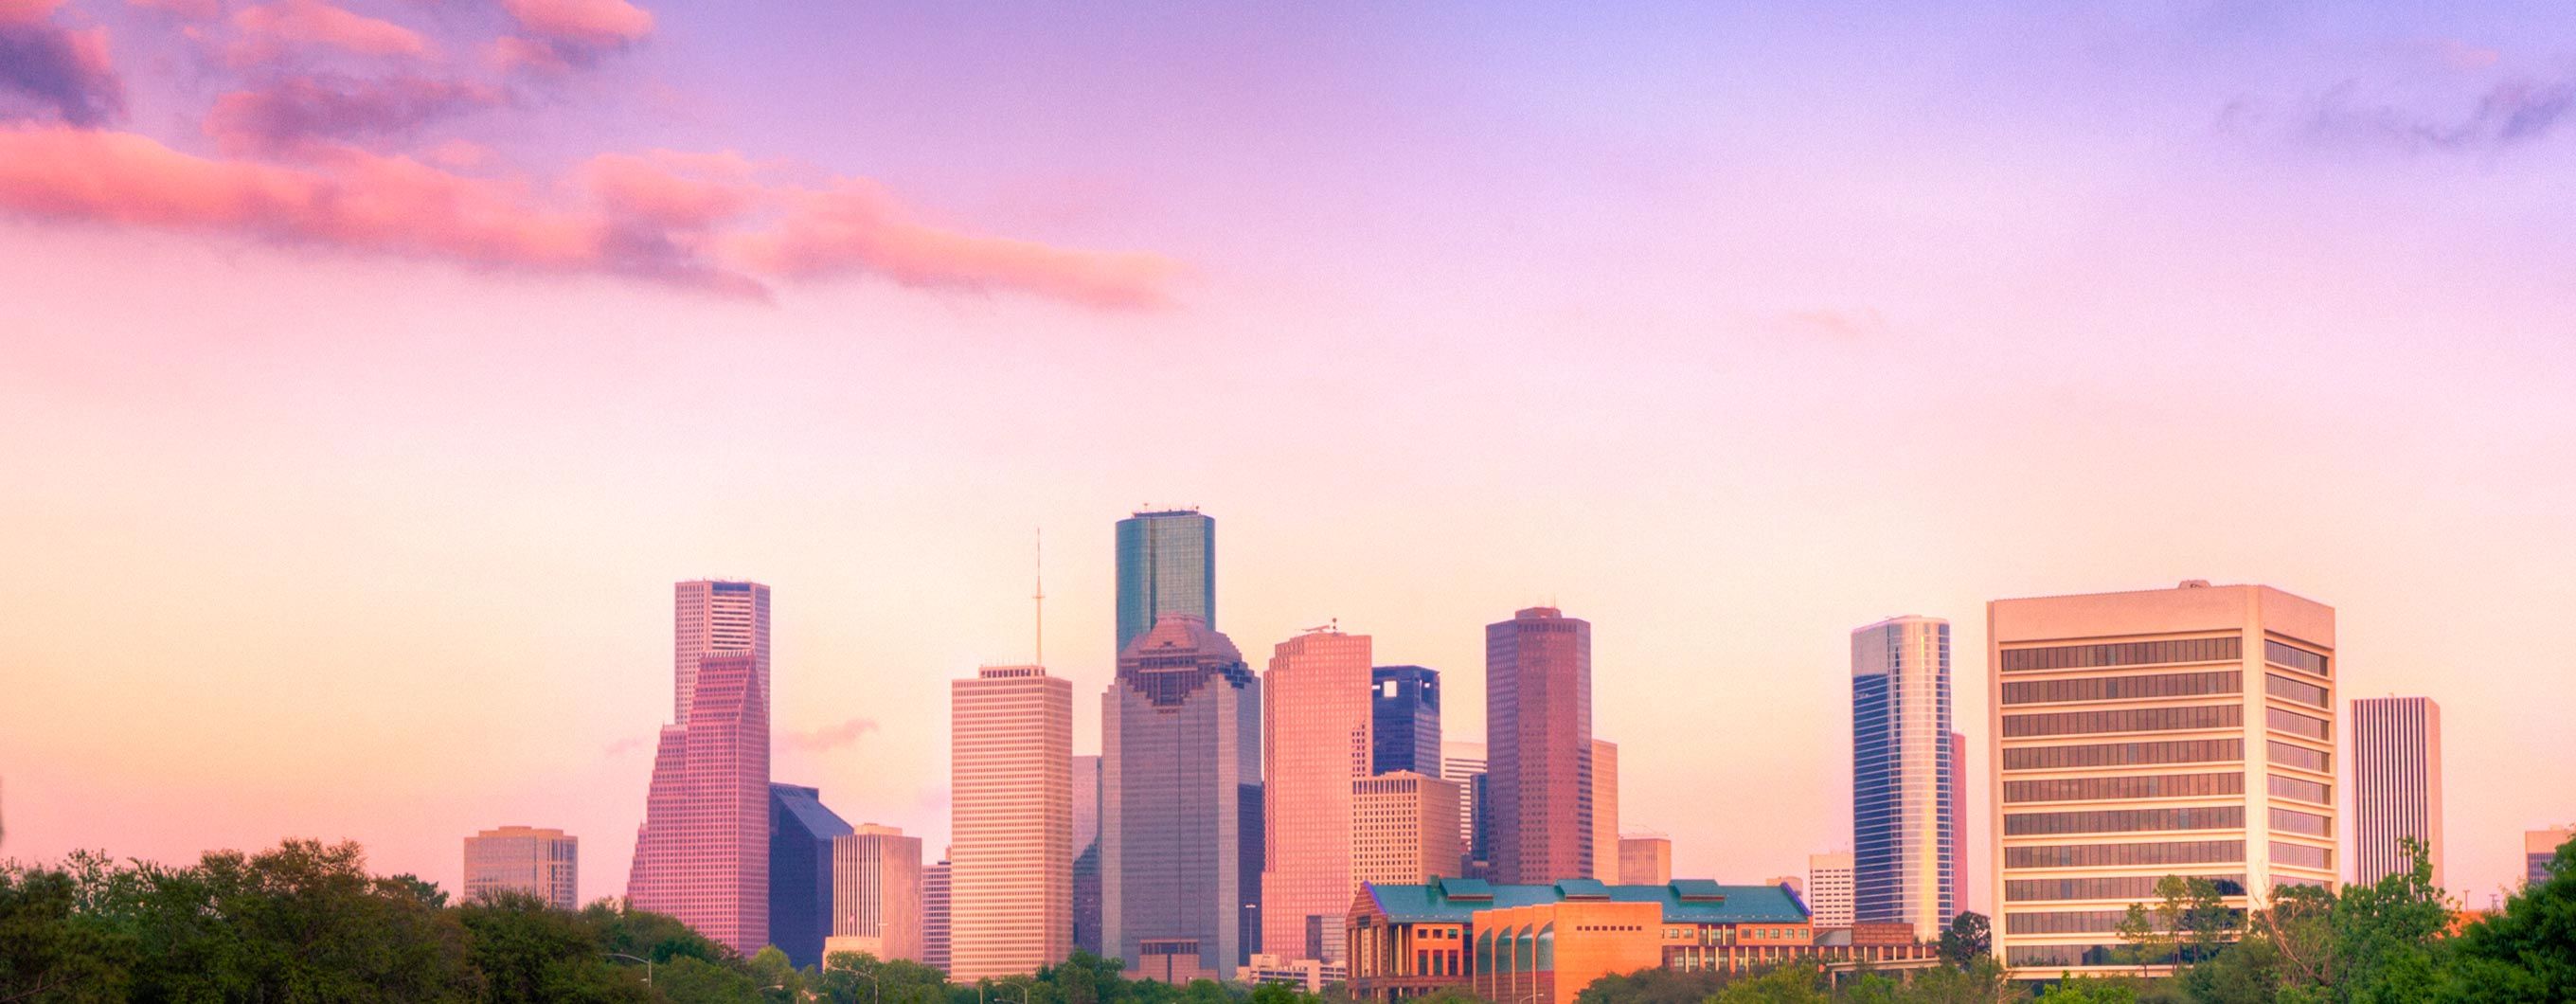 Image of the Houston city skyline with a purple and pink sky and trees in font of some of the buildings